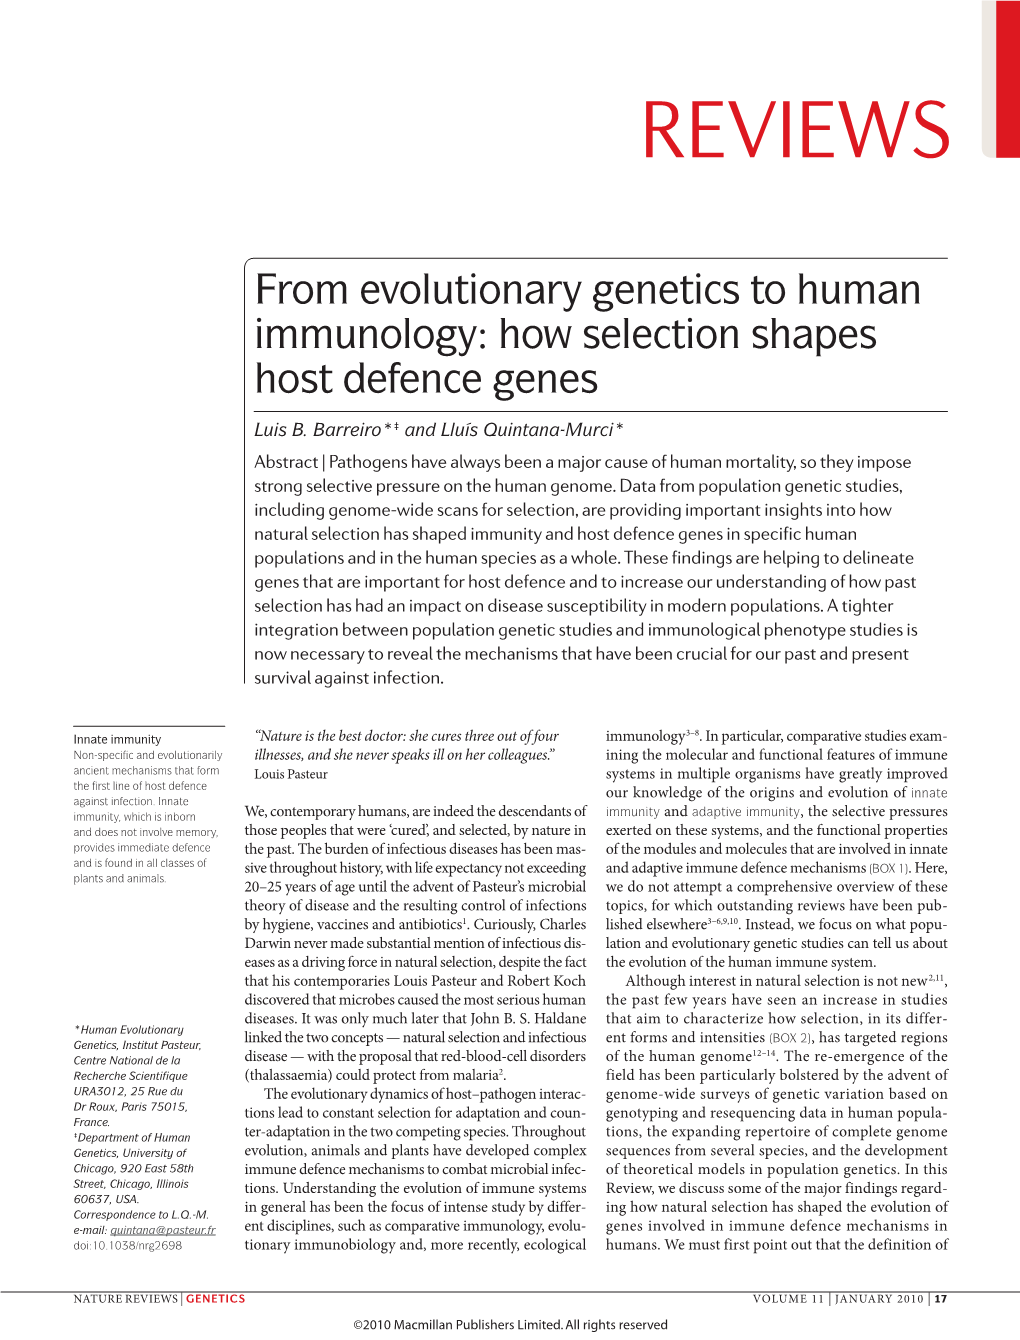 From Evolutionary Genetics to Human Immunology: How Selection Shapes Host Defence Genes